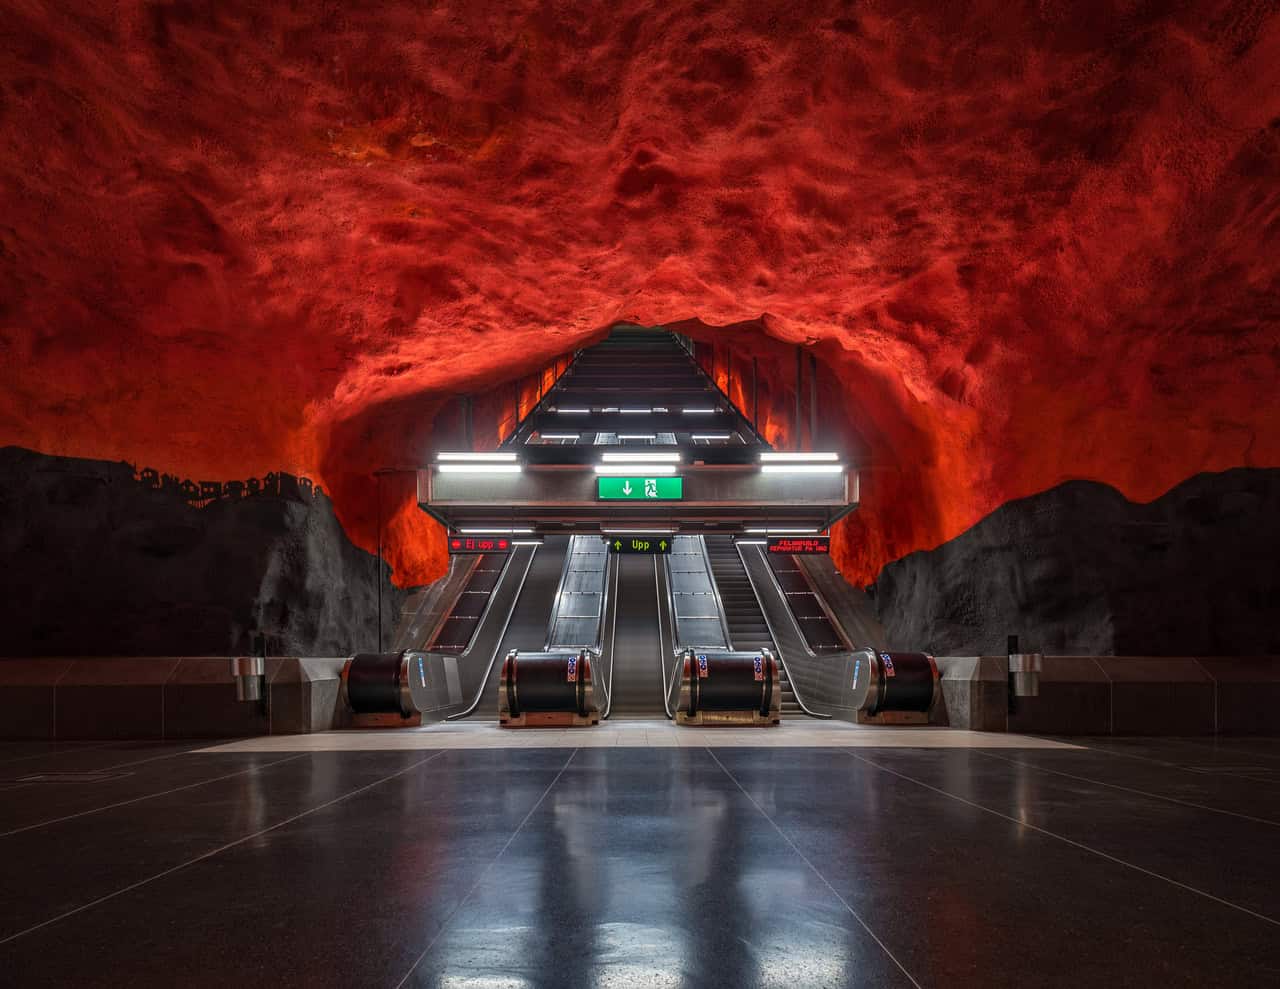 A modern underground station with a striking red, rock-like cave ceiling, illuminated escalators, and green emergency exit signs showcases the elegance of advanced underground construction techniques.